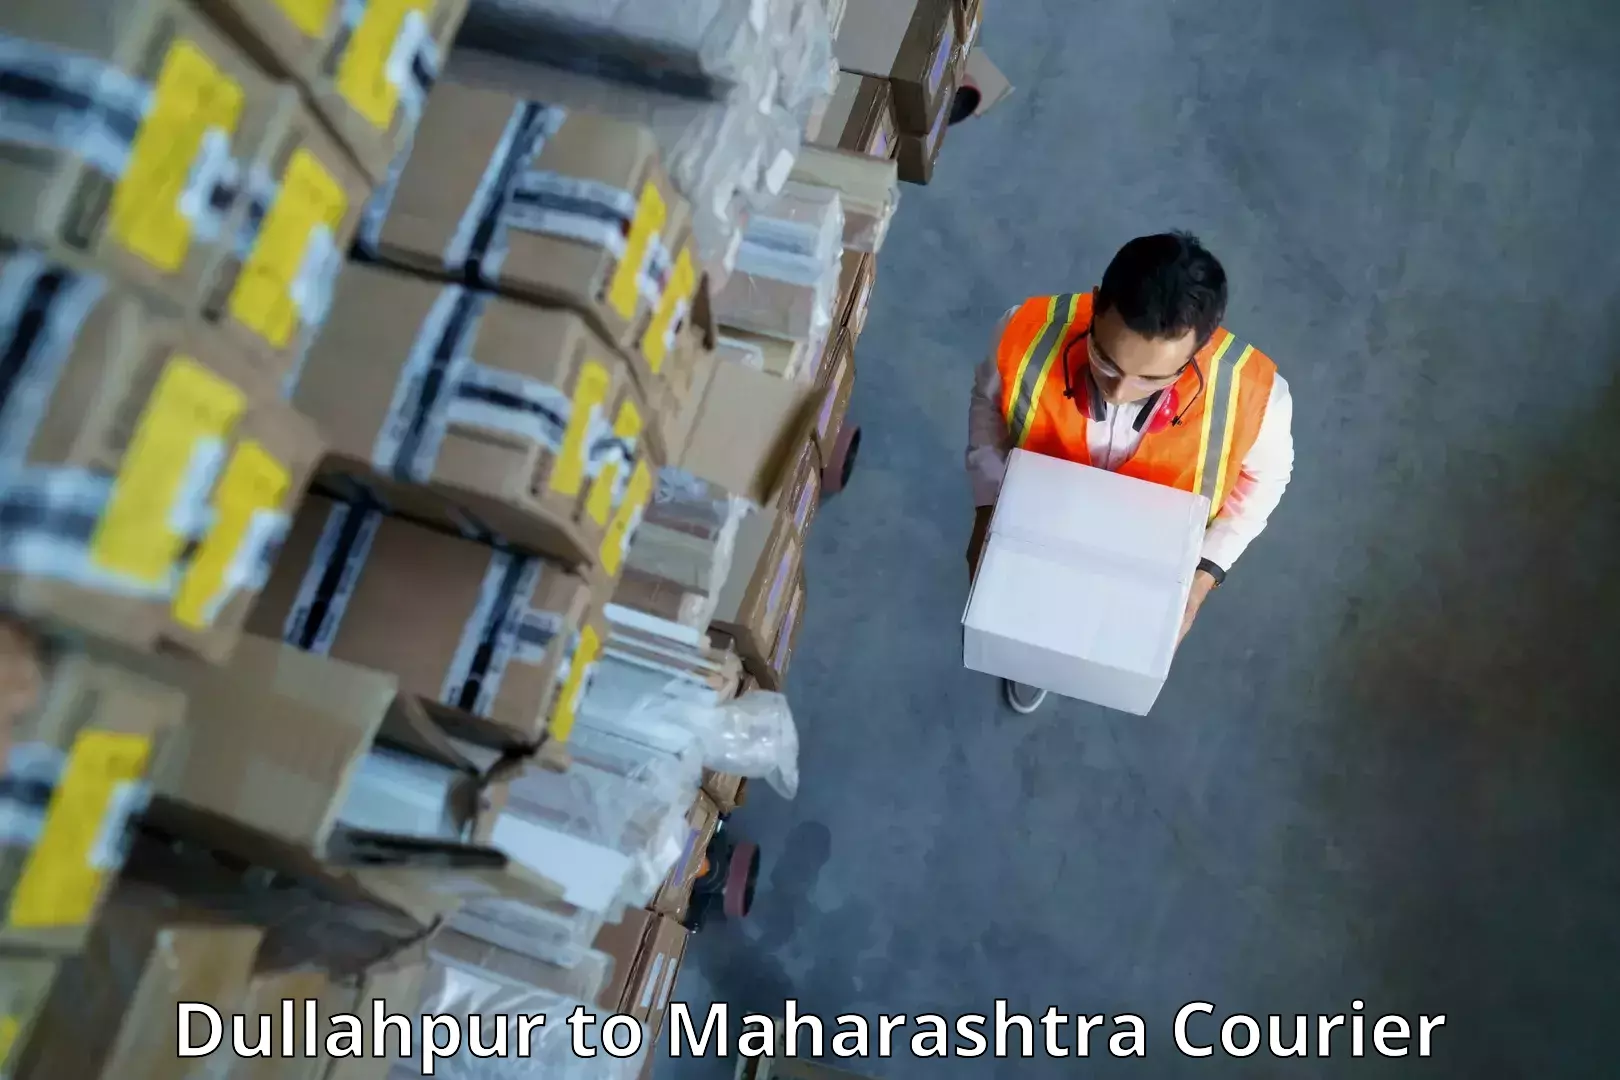 International courier networks Dullahpur to Panchwad